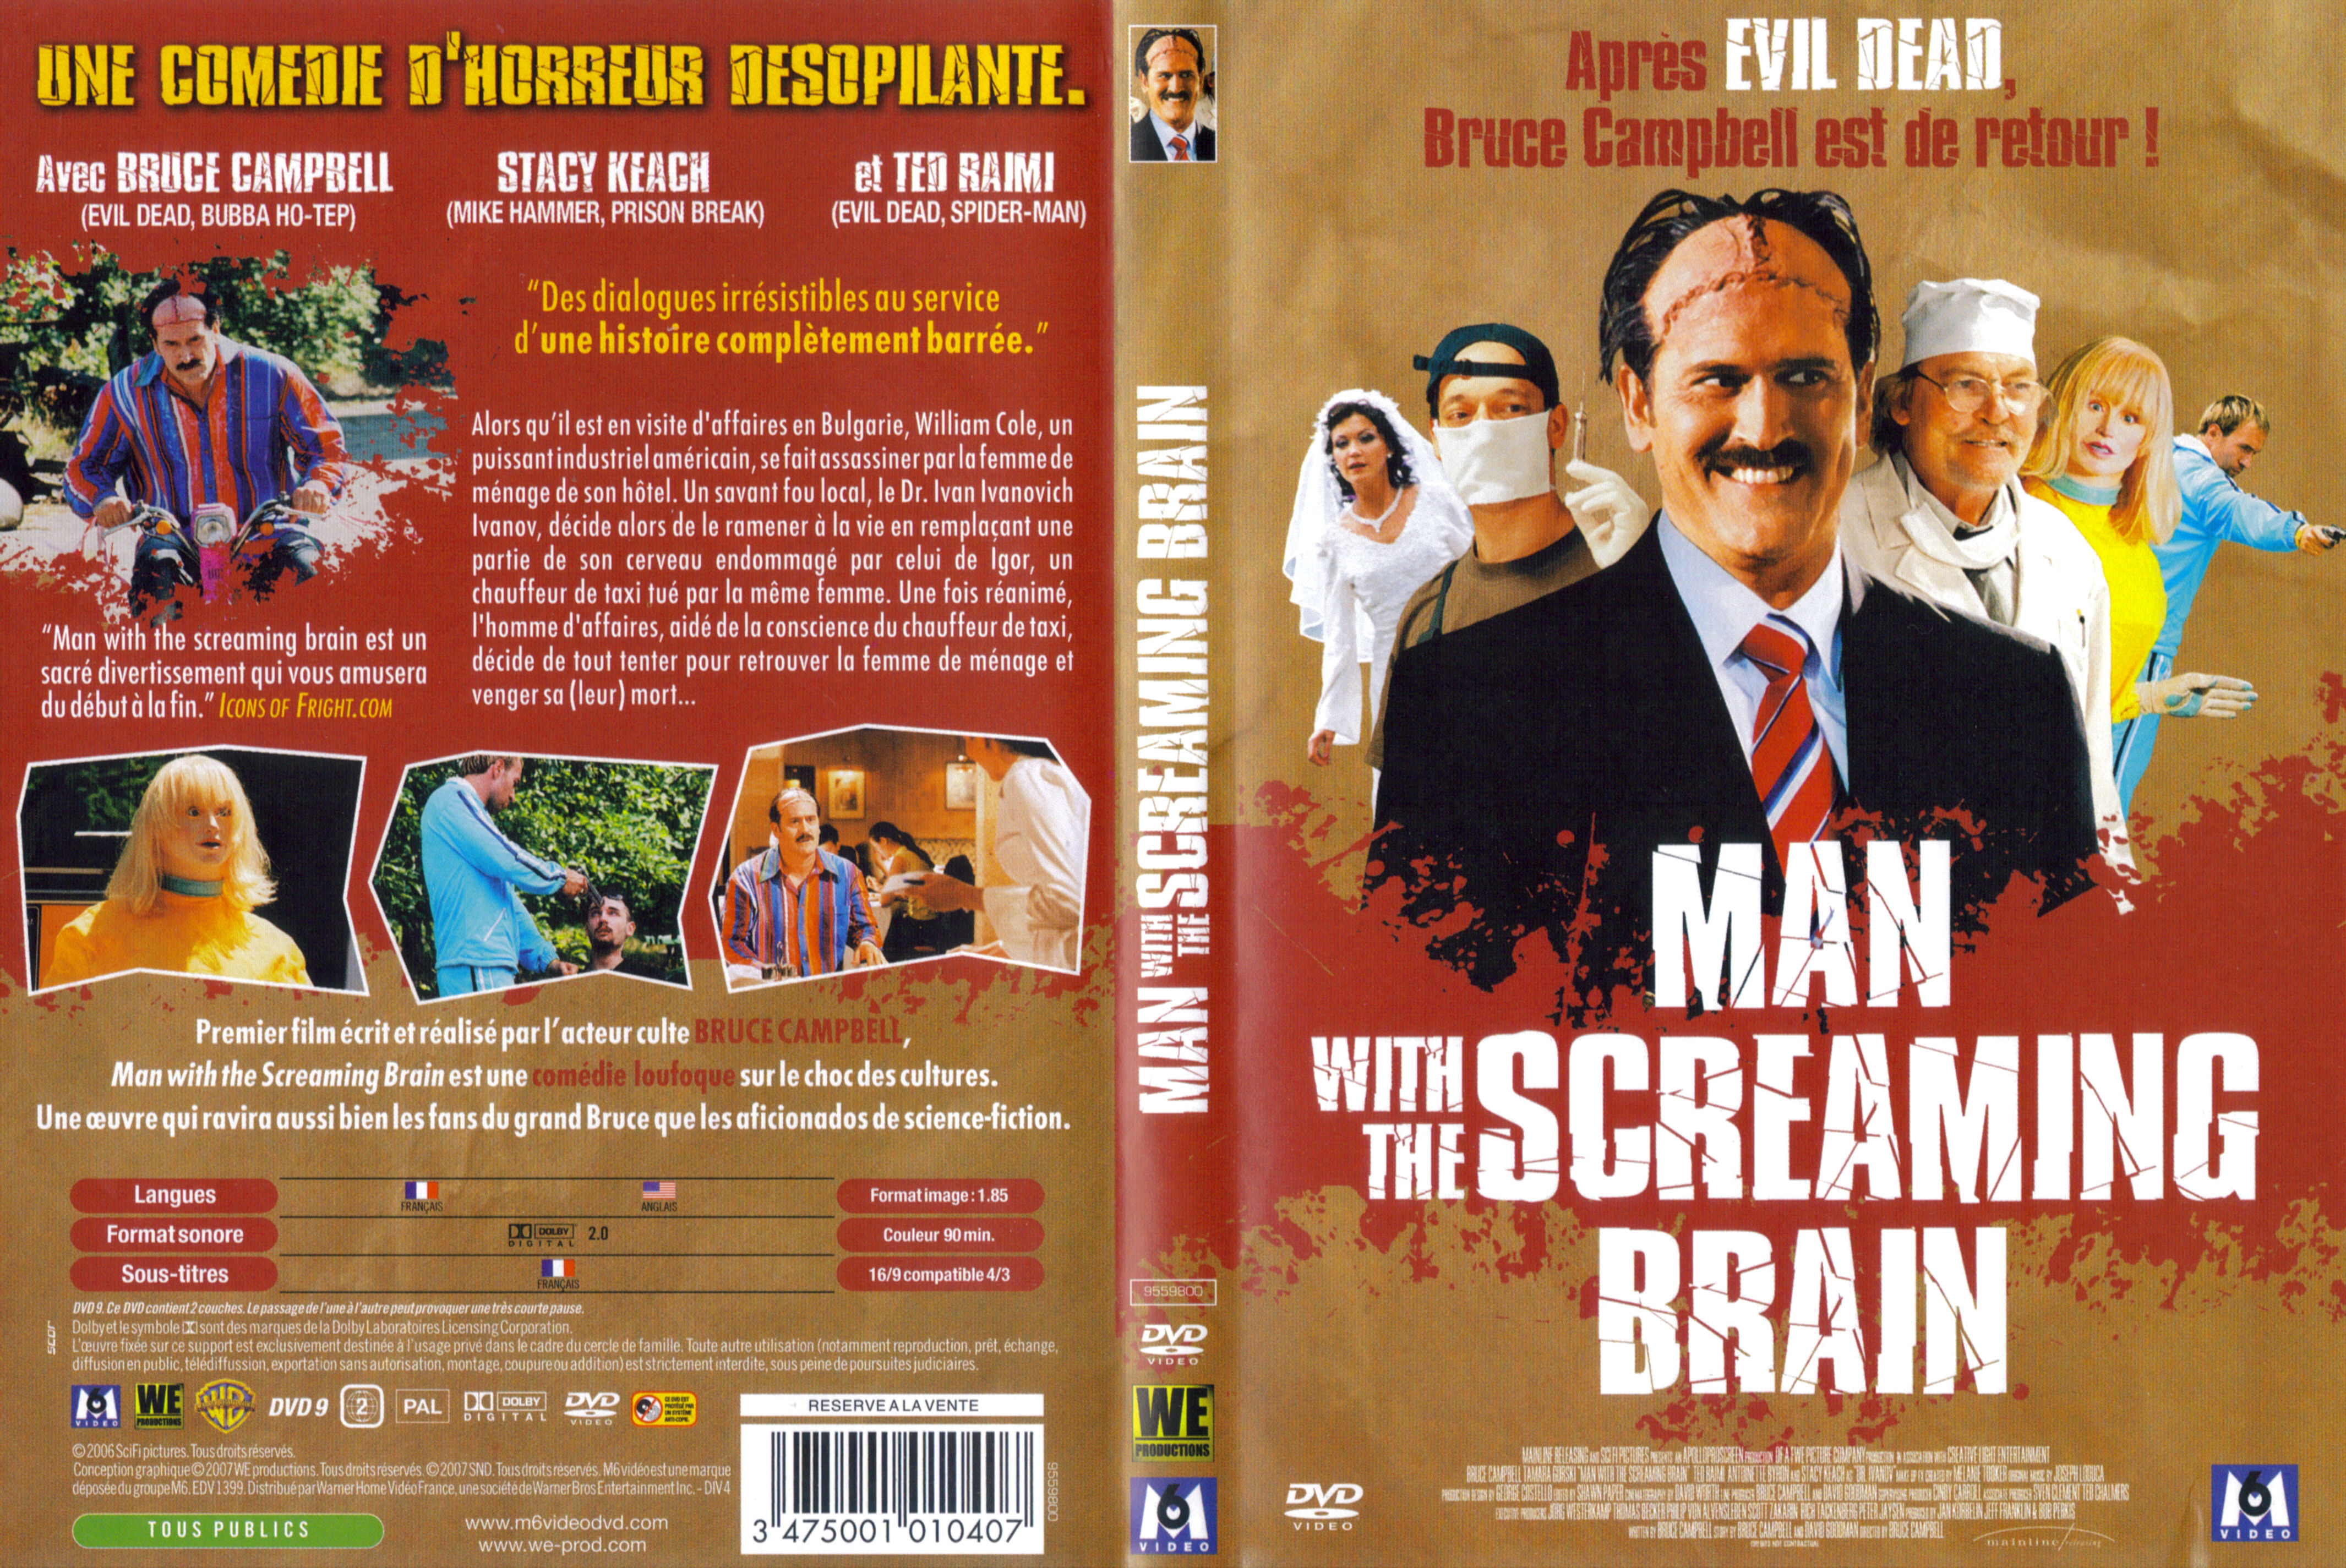 Jaquette DVD Man with a screaming brain